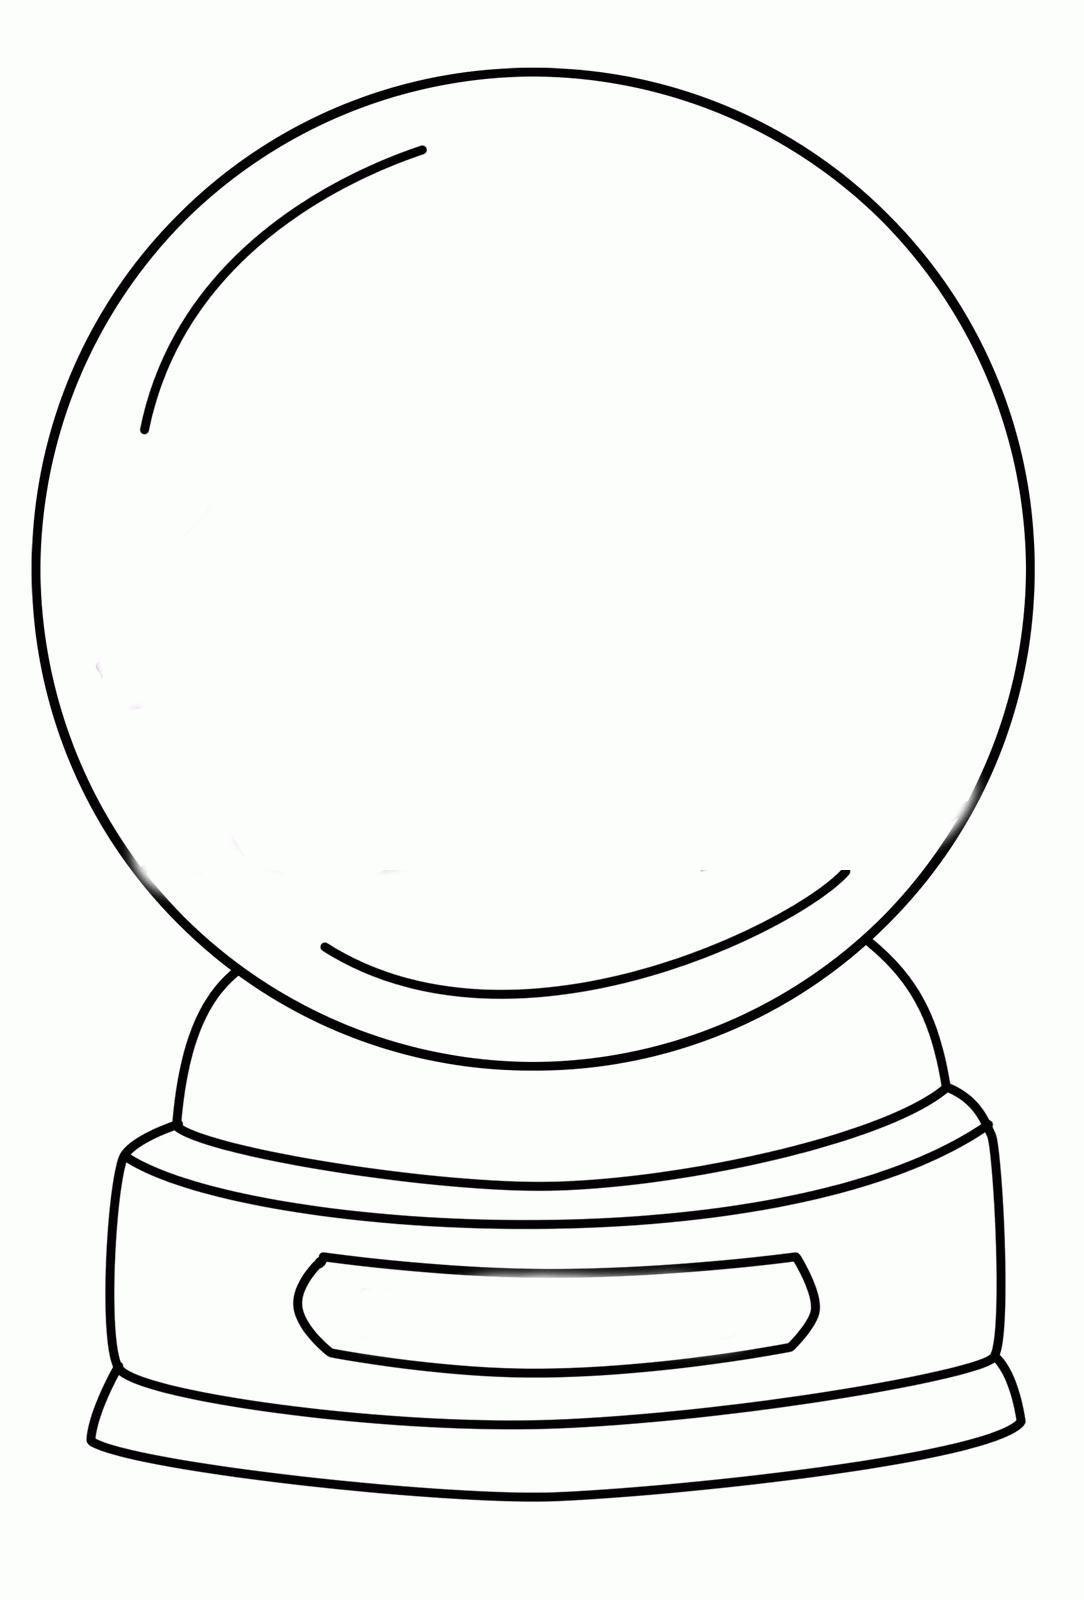 Snow Globe Coloring Page Printable Iconmaker Info